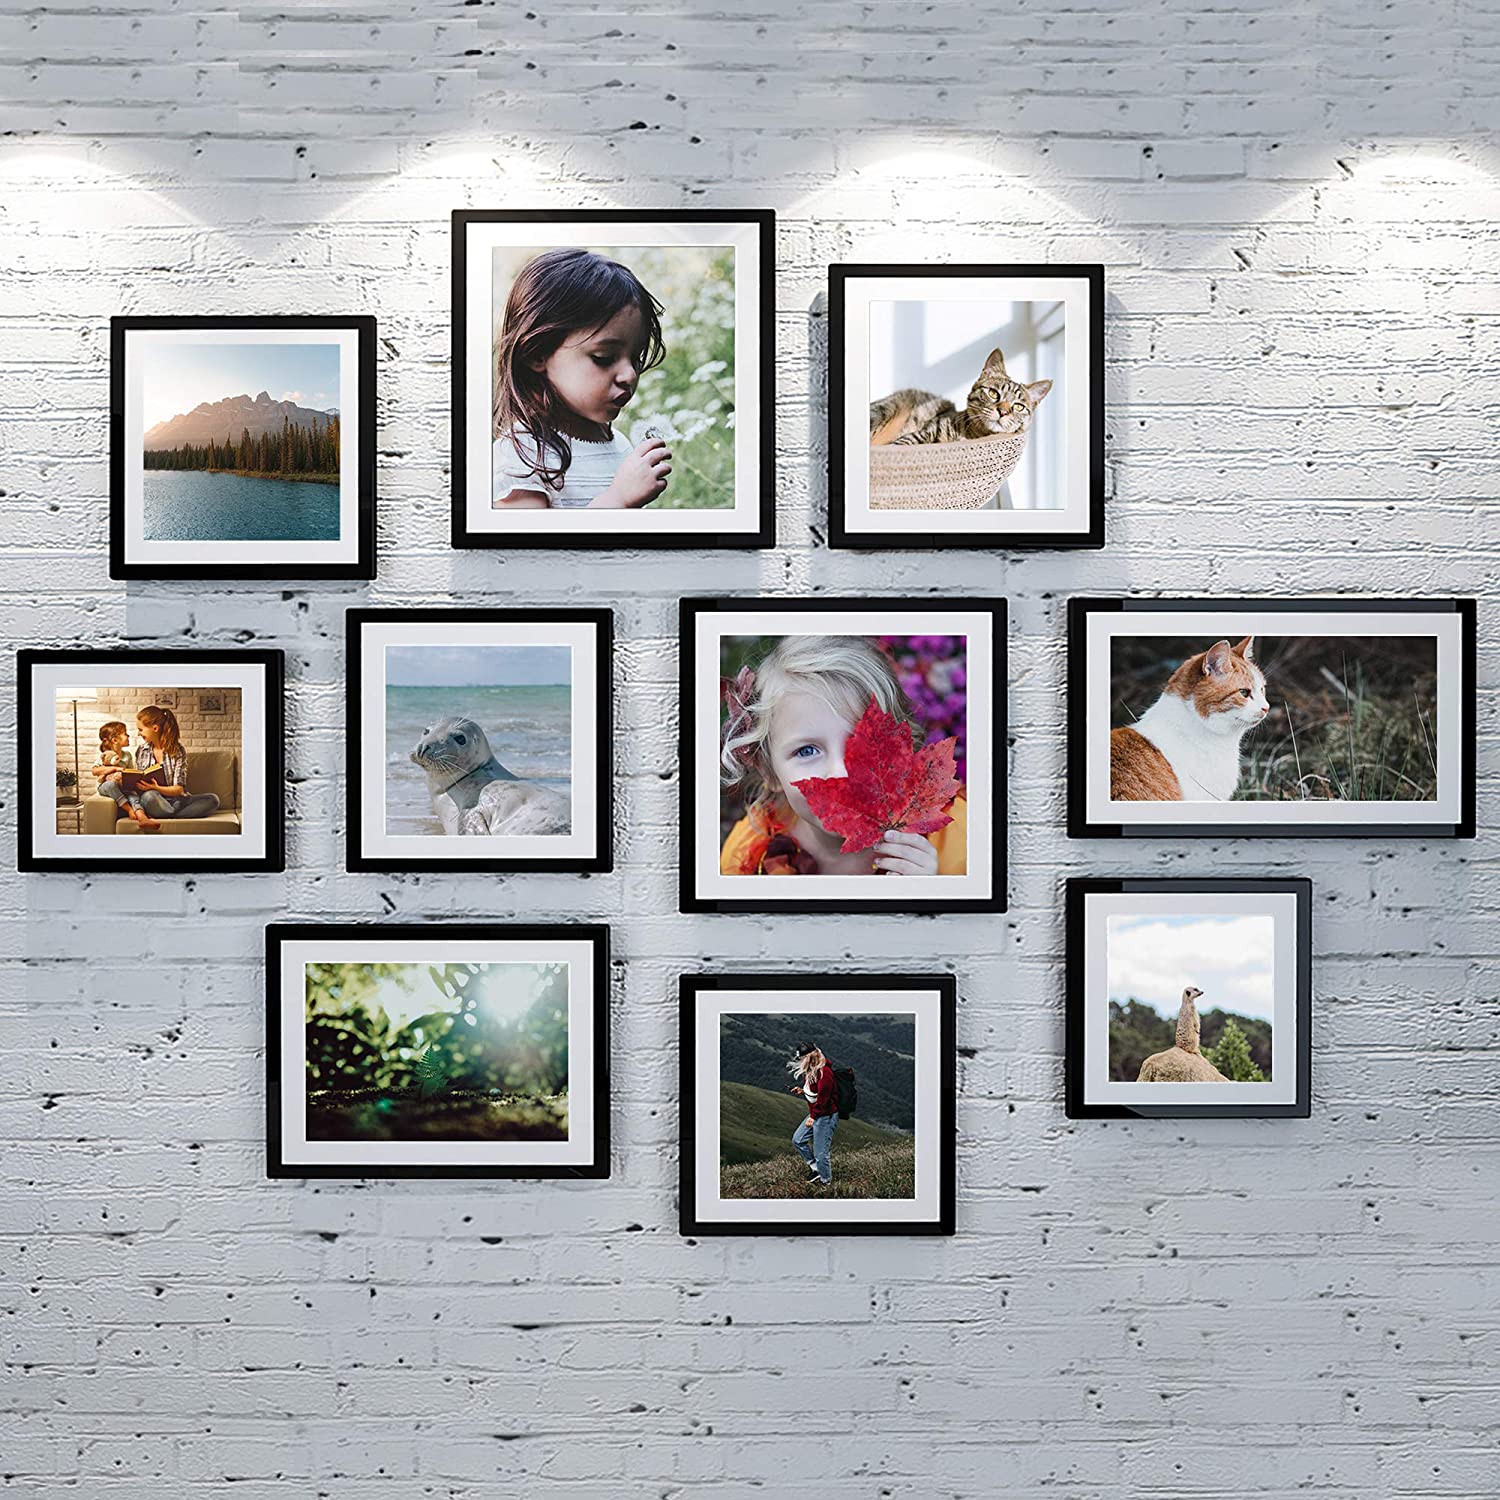 upsimples 16x20 Picture Frame Set of 5,Display Pictures 11x14 with